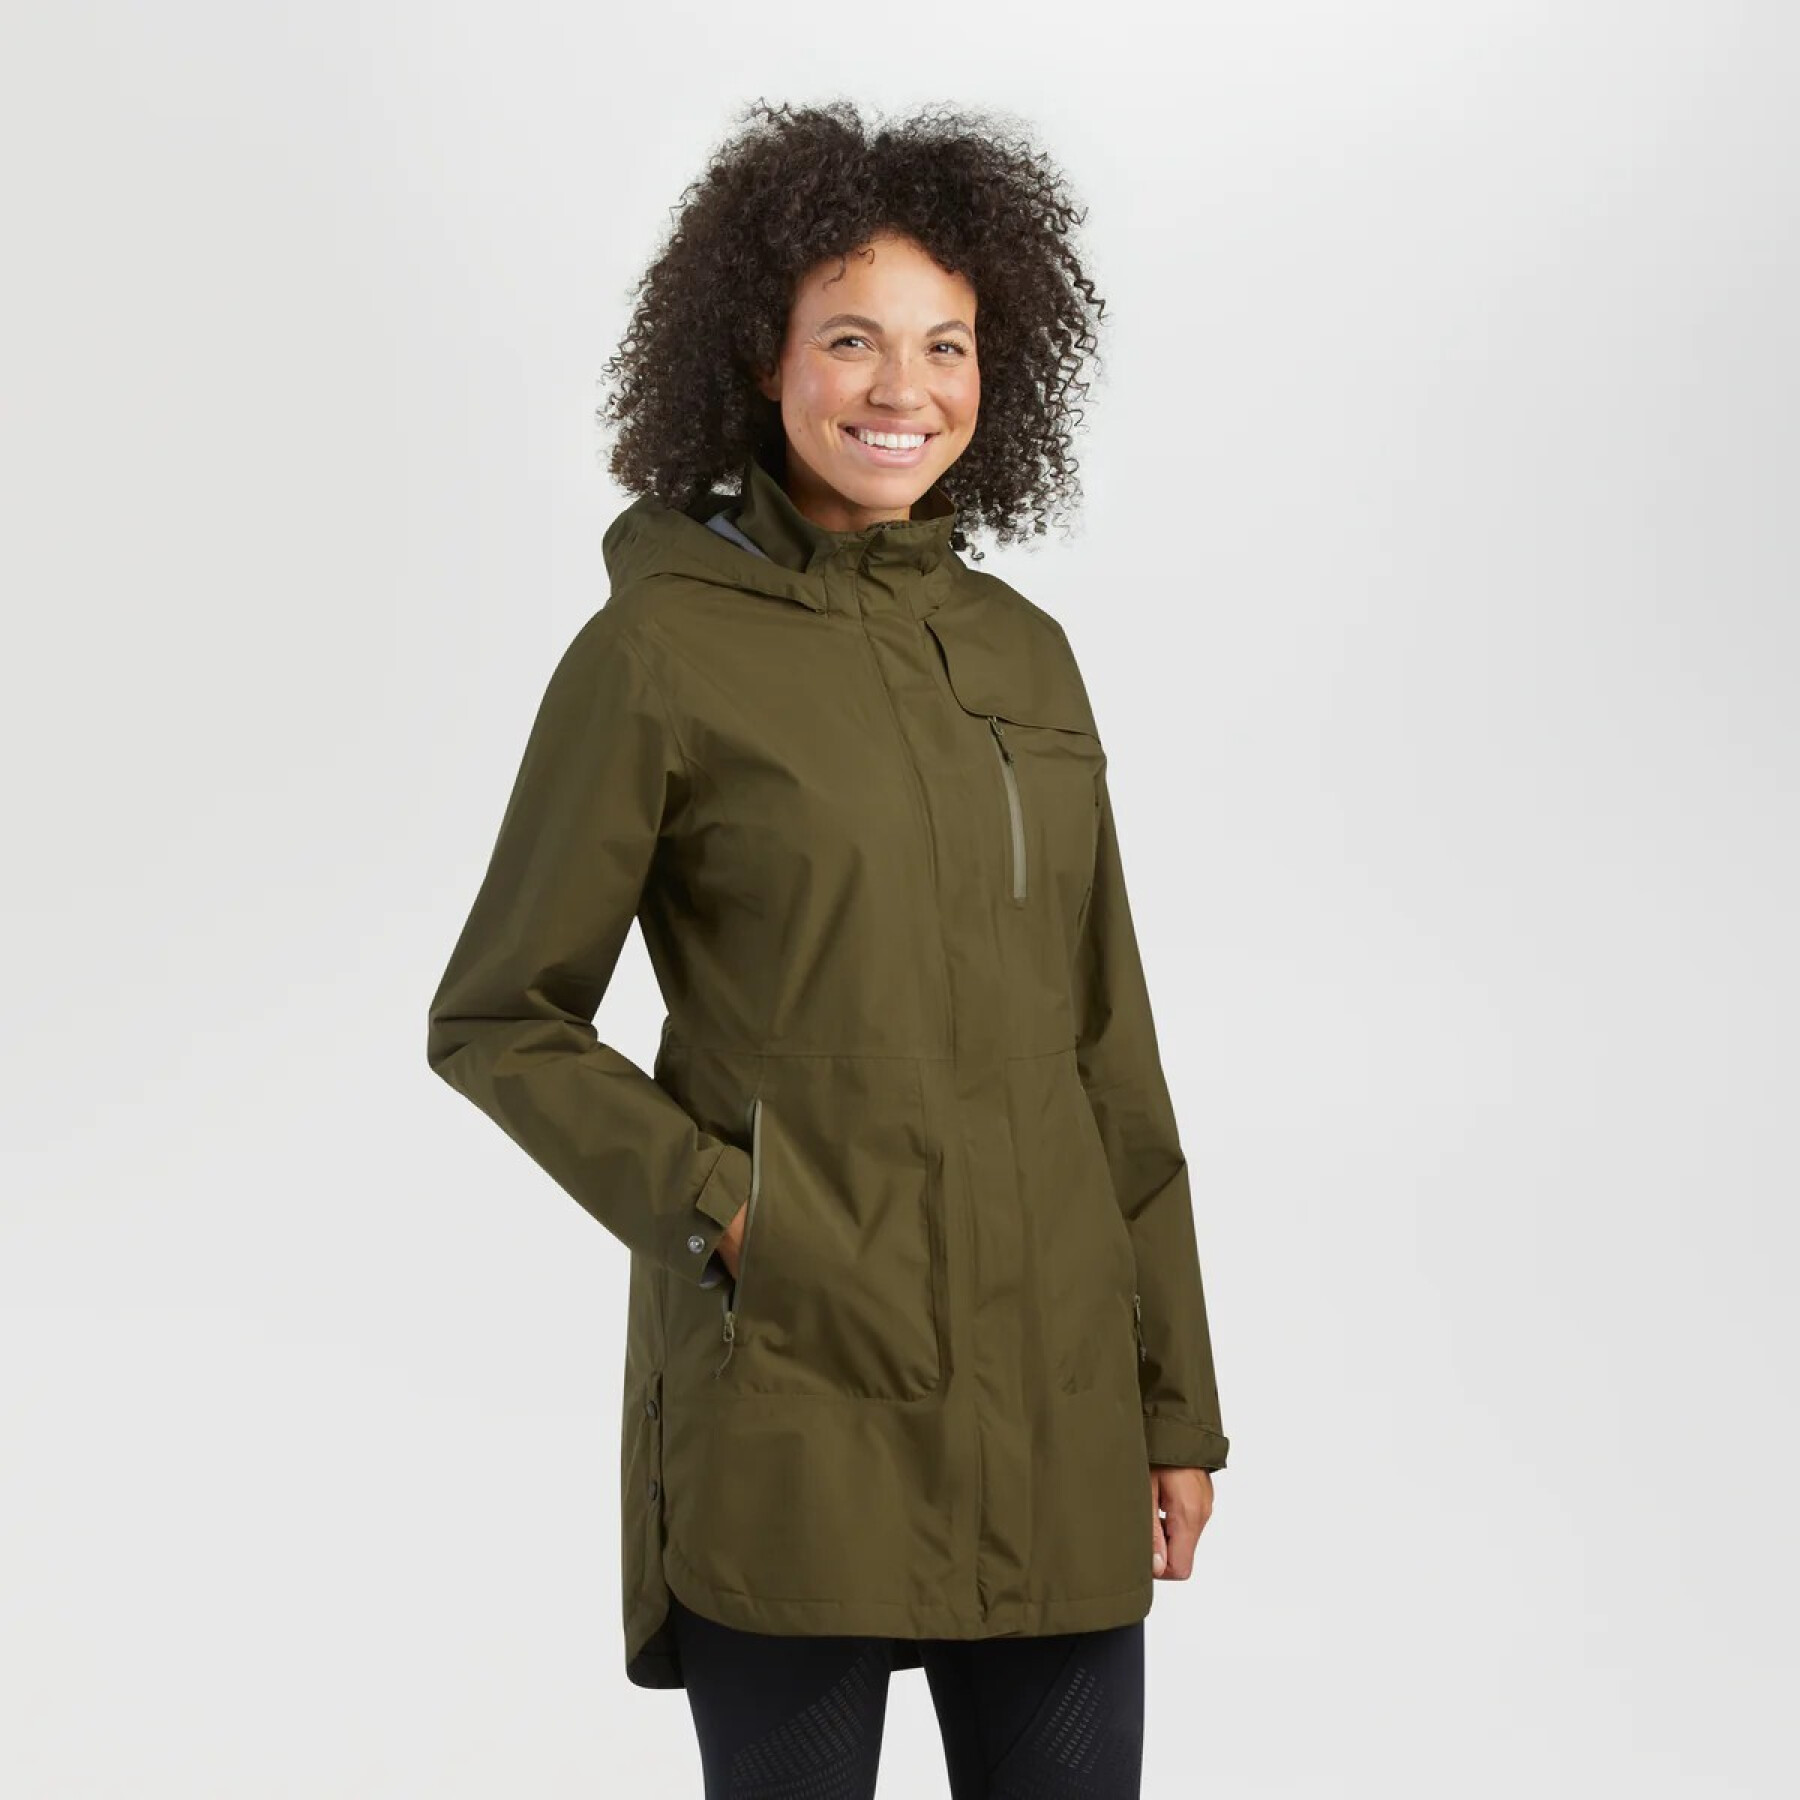 Chaqueta impermeable Outdoor Research Aspire